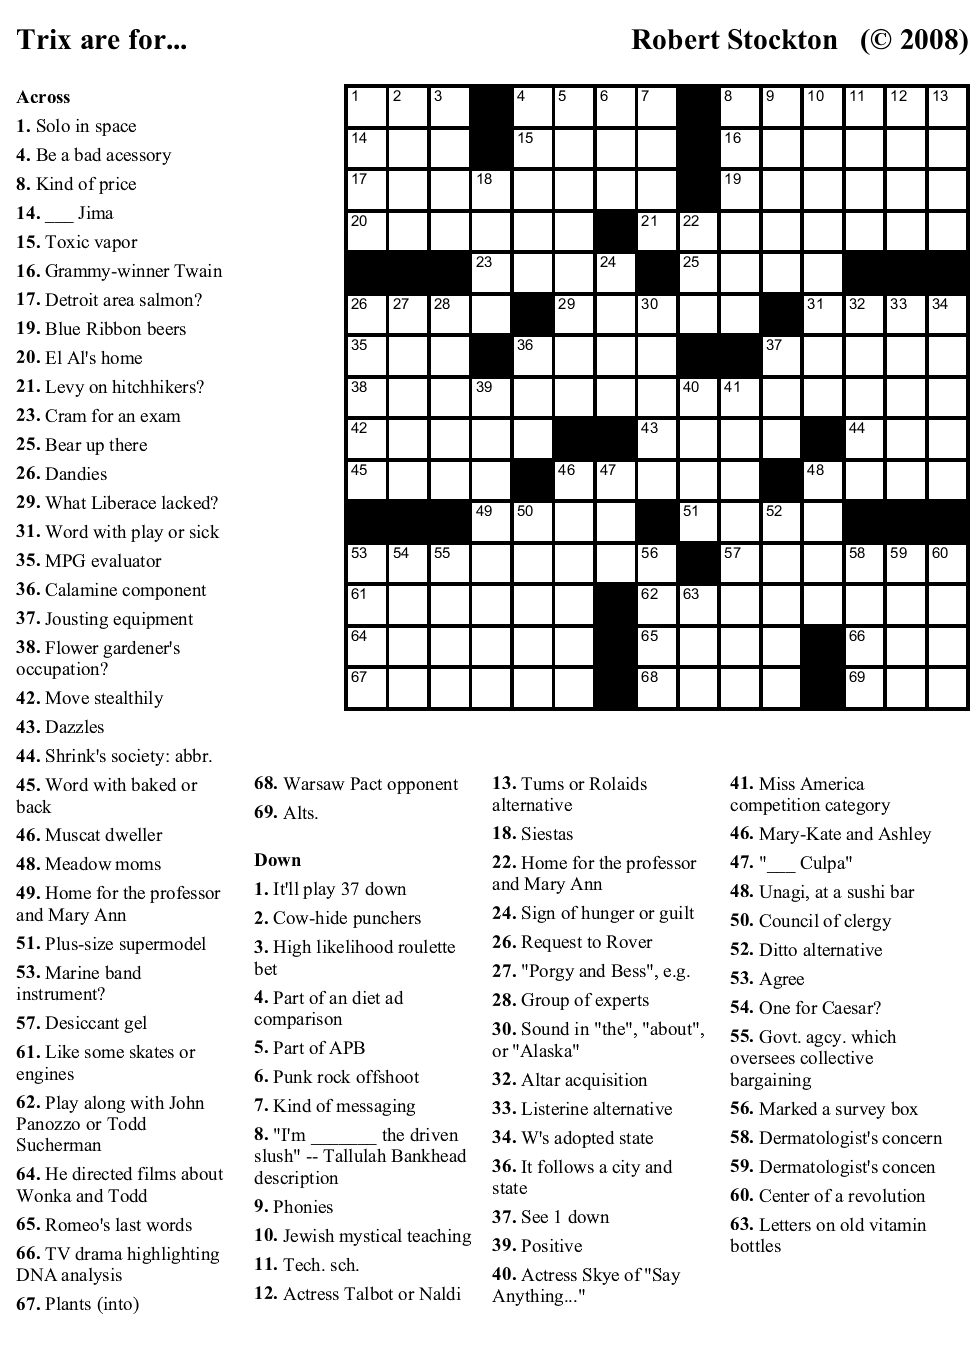 printable-celebrity-crossword-puzzles-that-are-handy-kuhn-blog